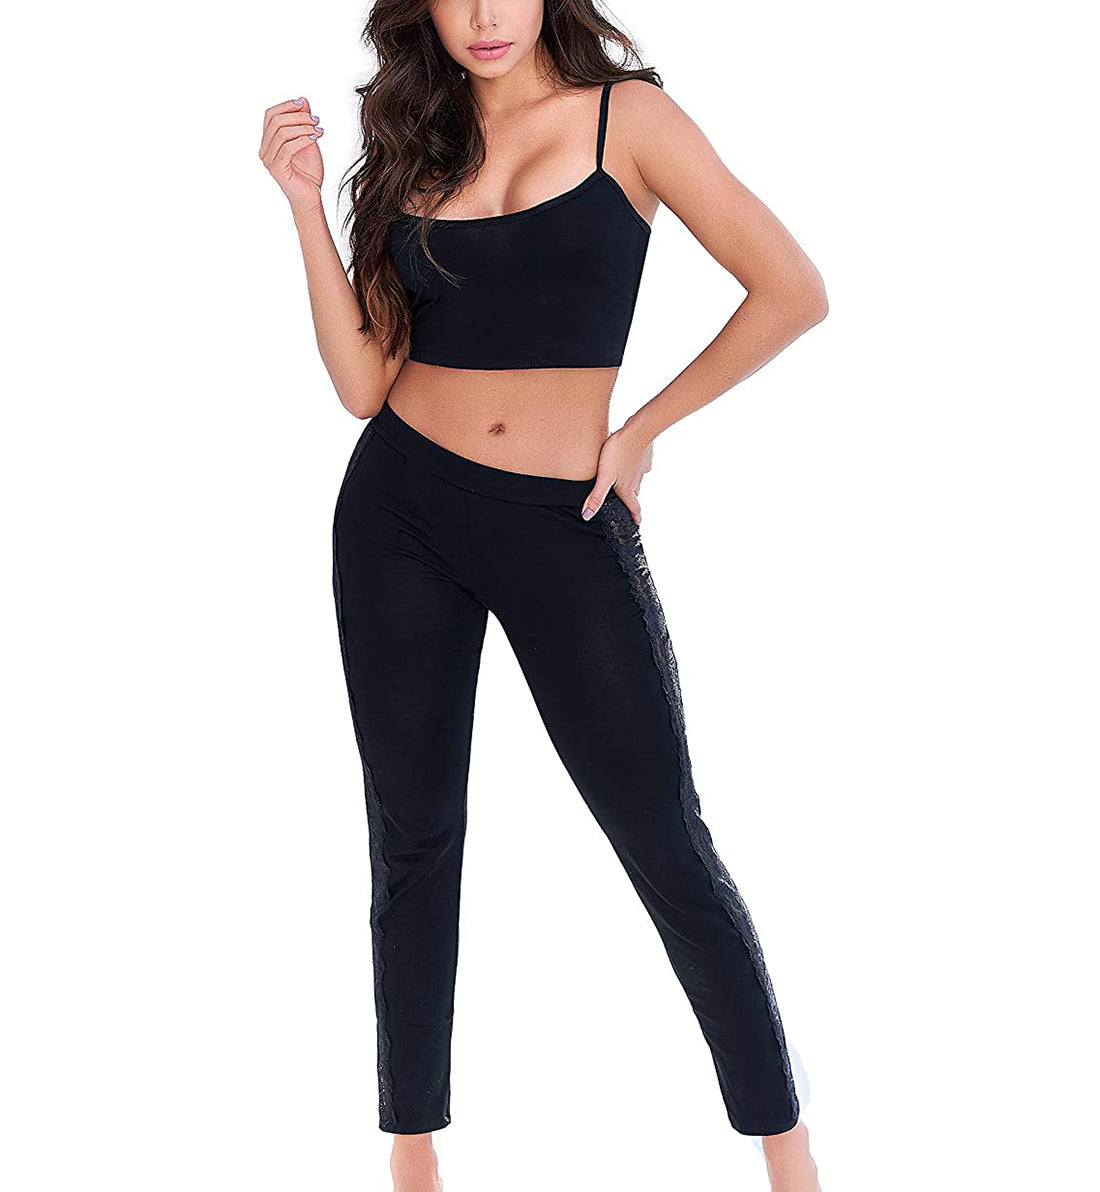 Mapale Lace Back Crop Top with Pant PJ set (7316),Small,Black - Black,Small